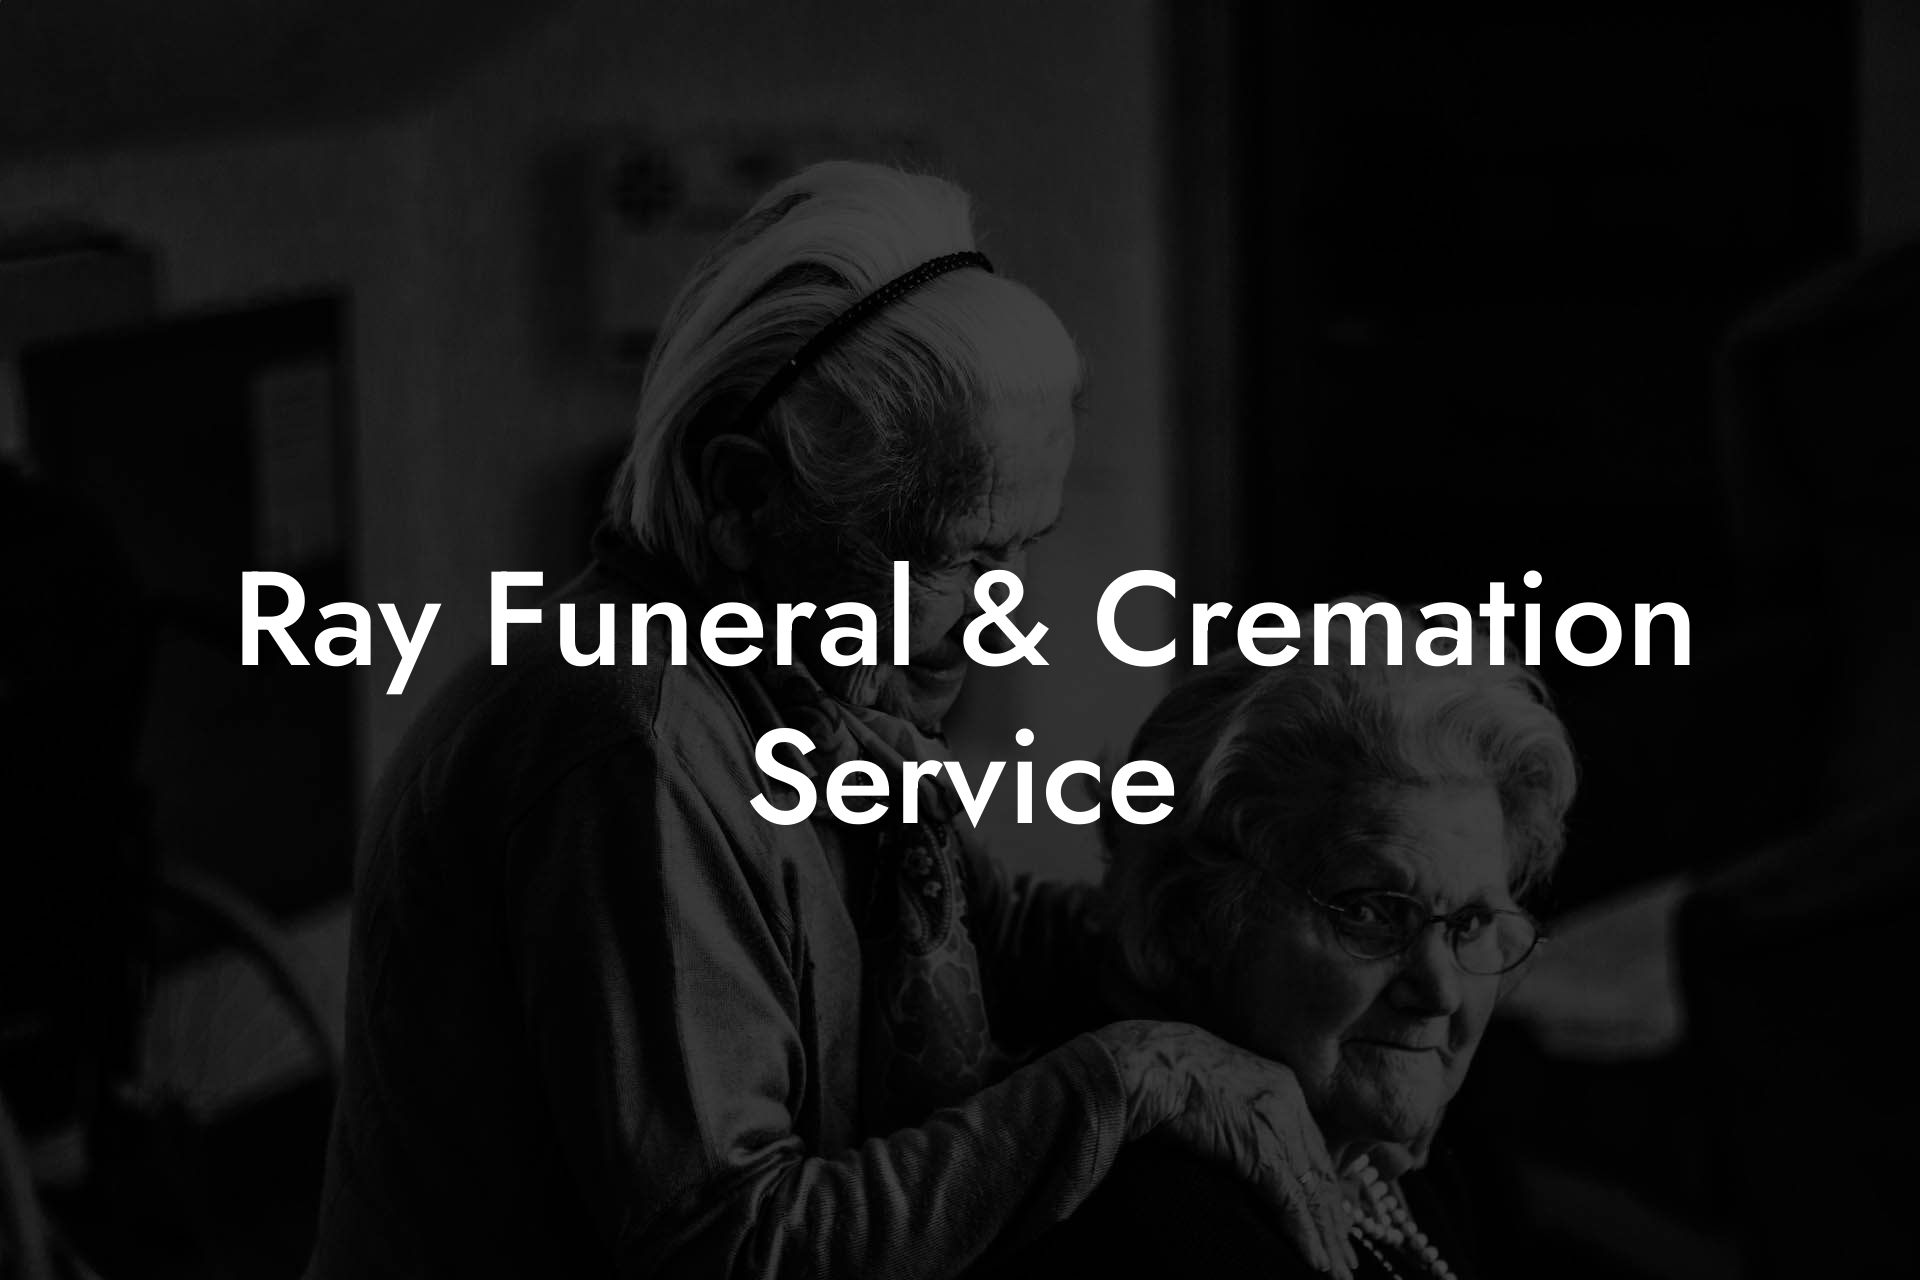 Ray Funeral & Cremation Service